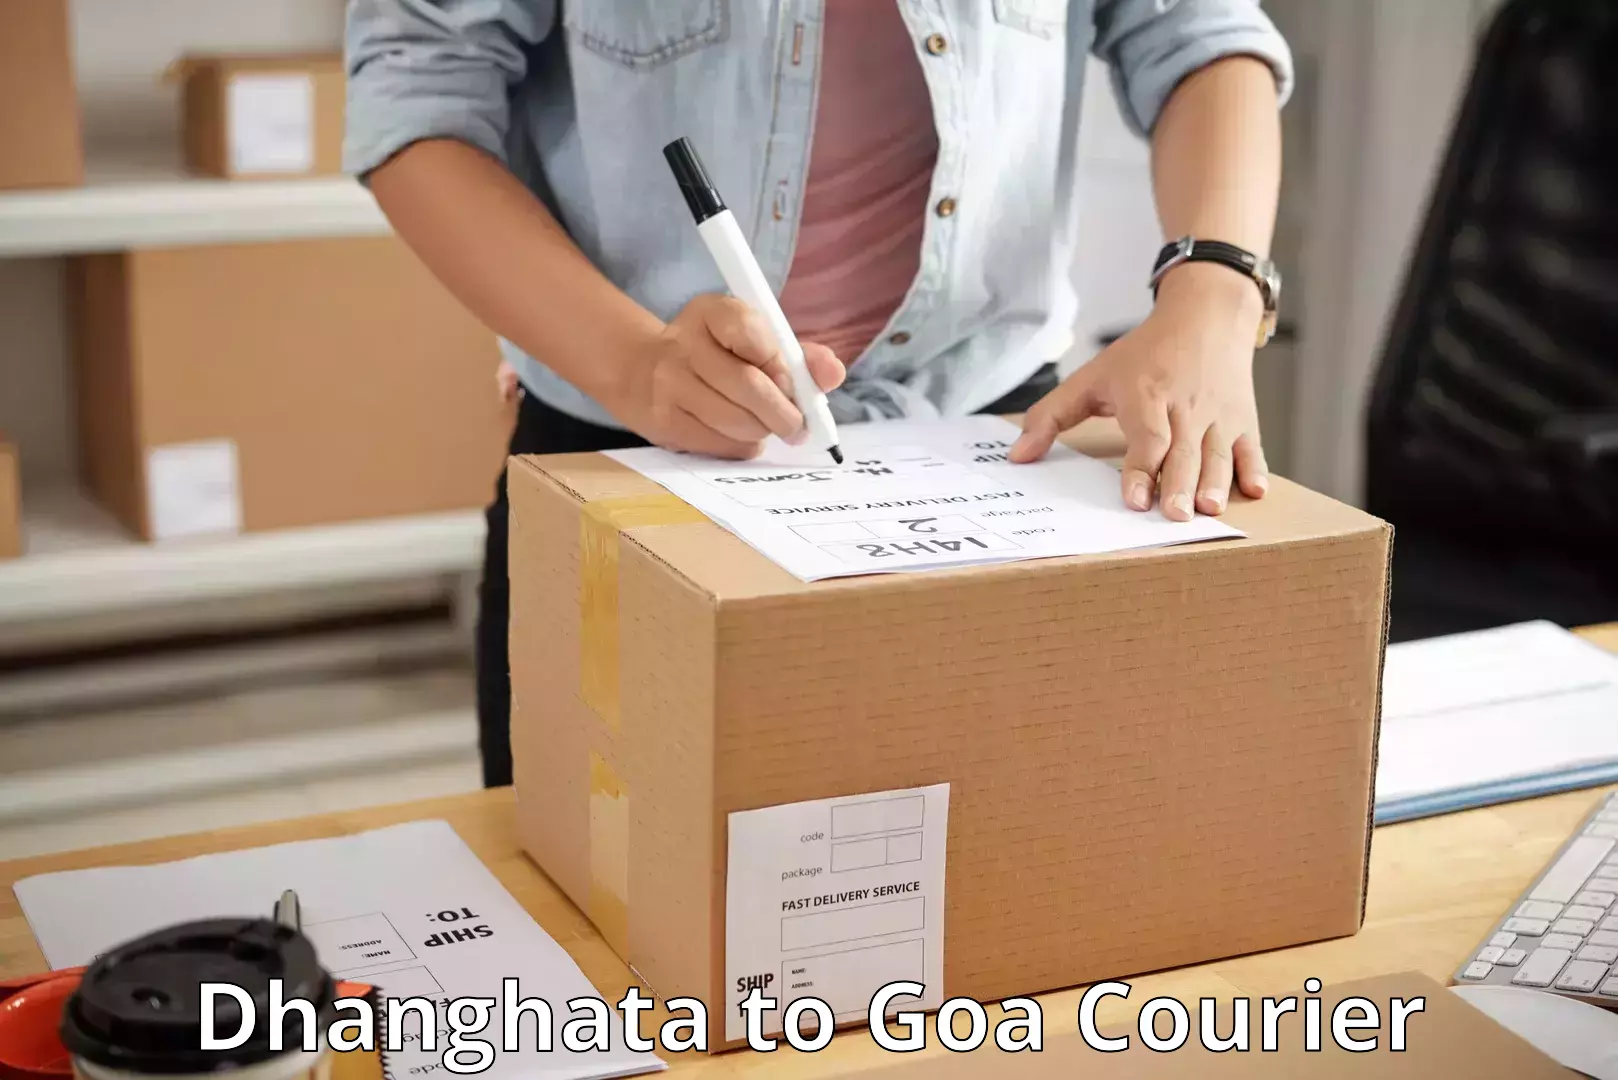 On-call courier service Dhanghata to Goa University